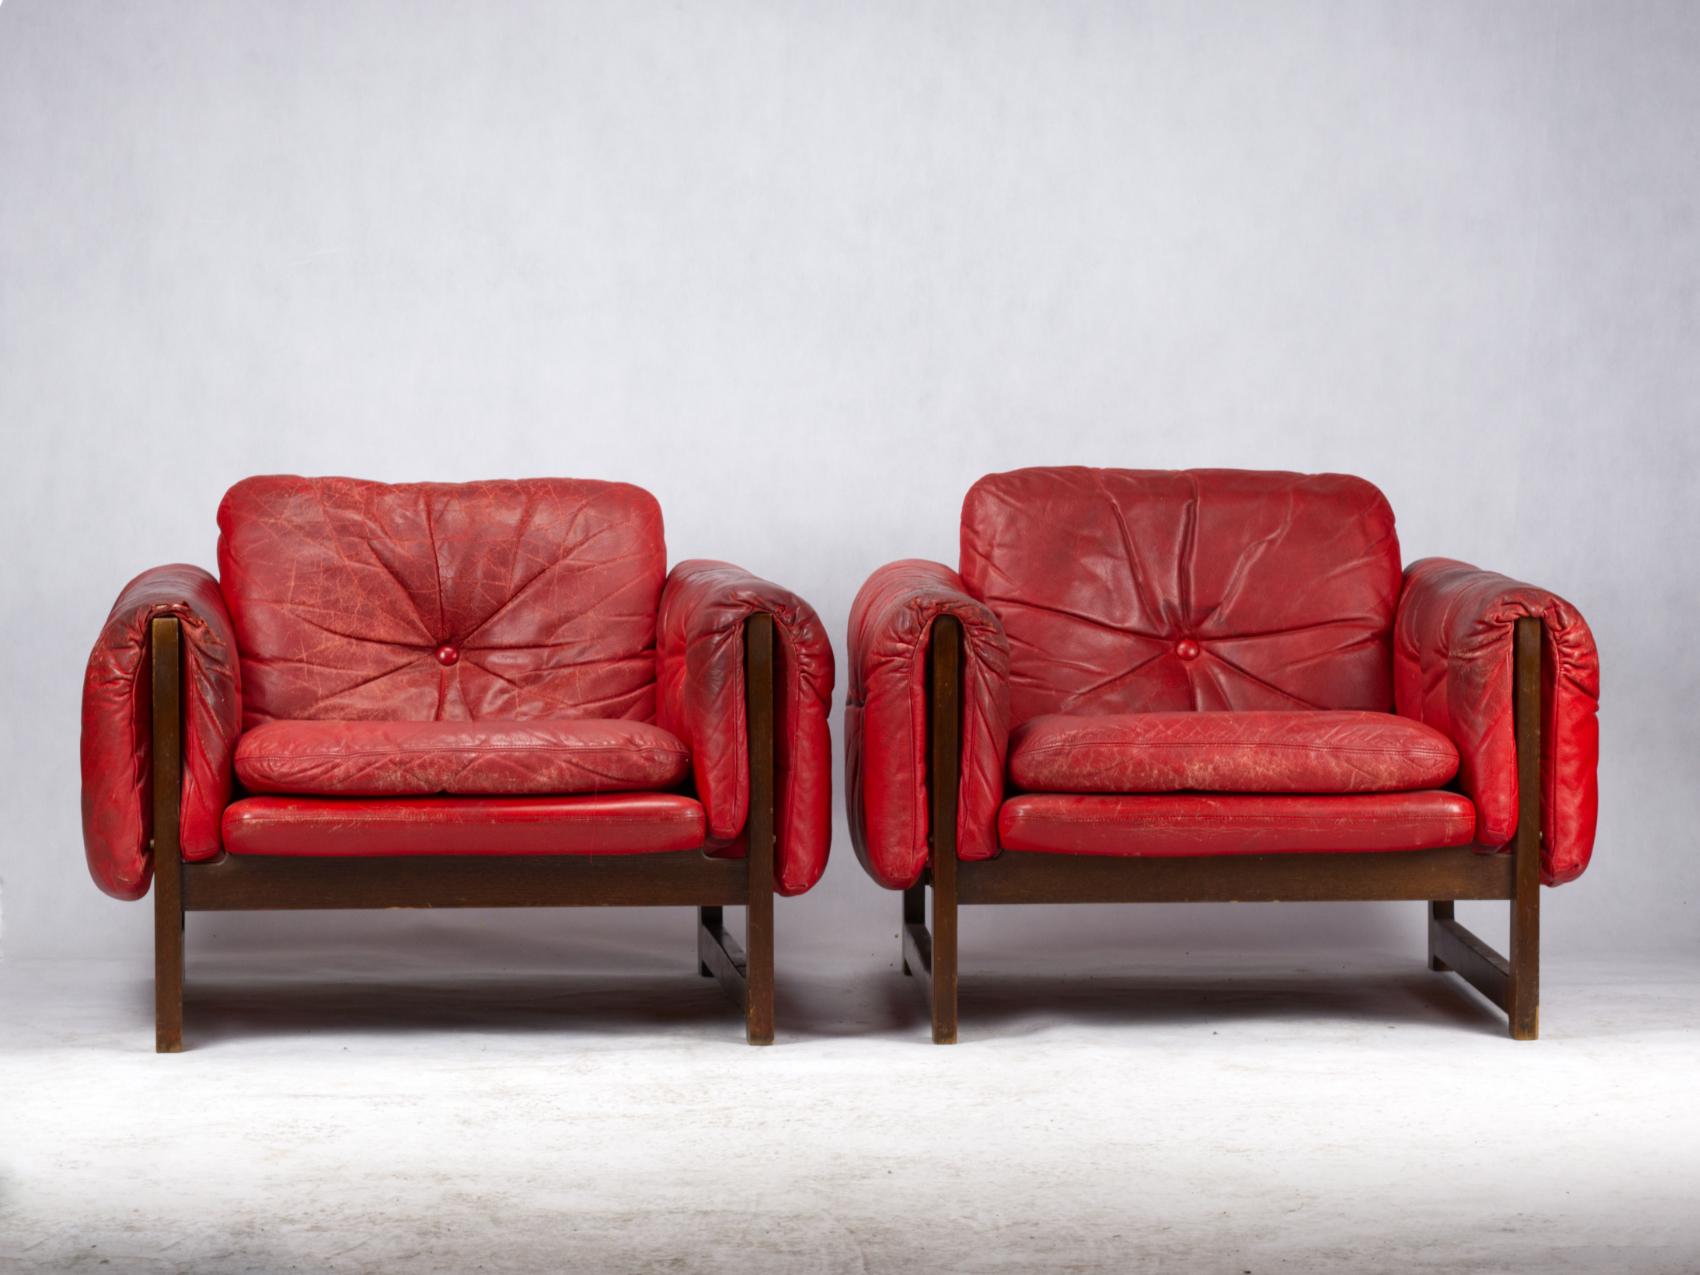 A pair of red leather lounge chairs, 